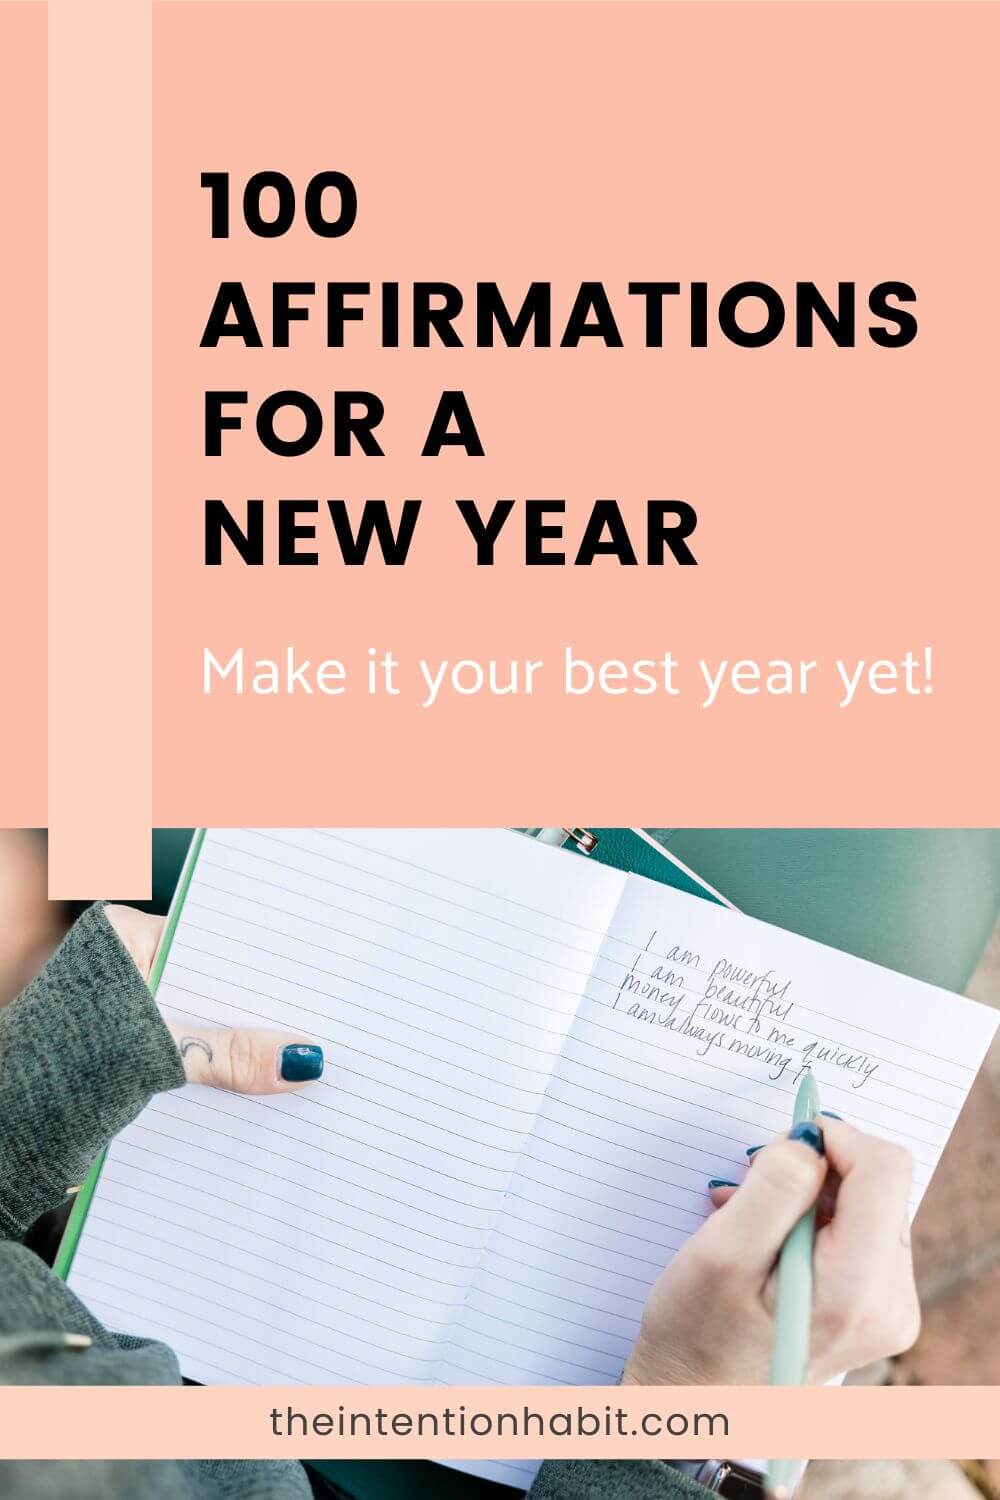 100 affirmations for a new year.